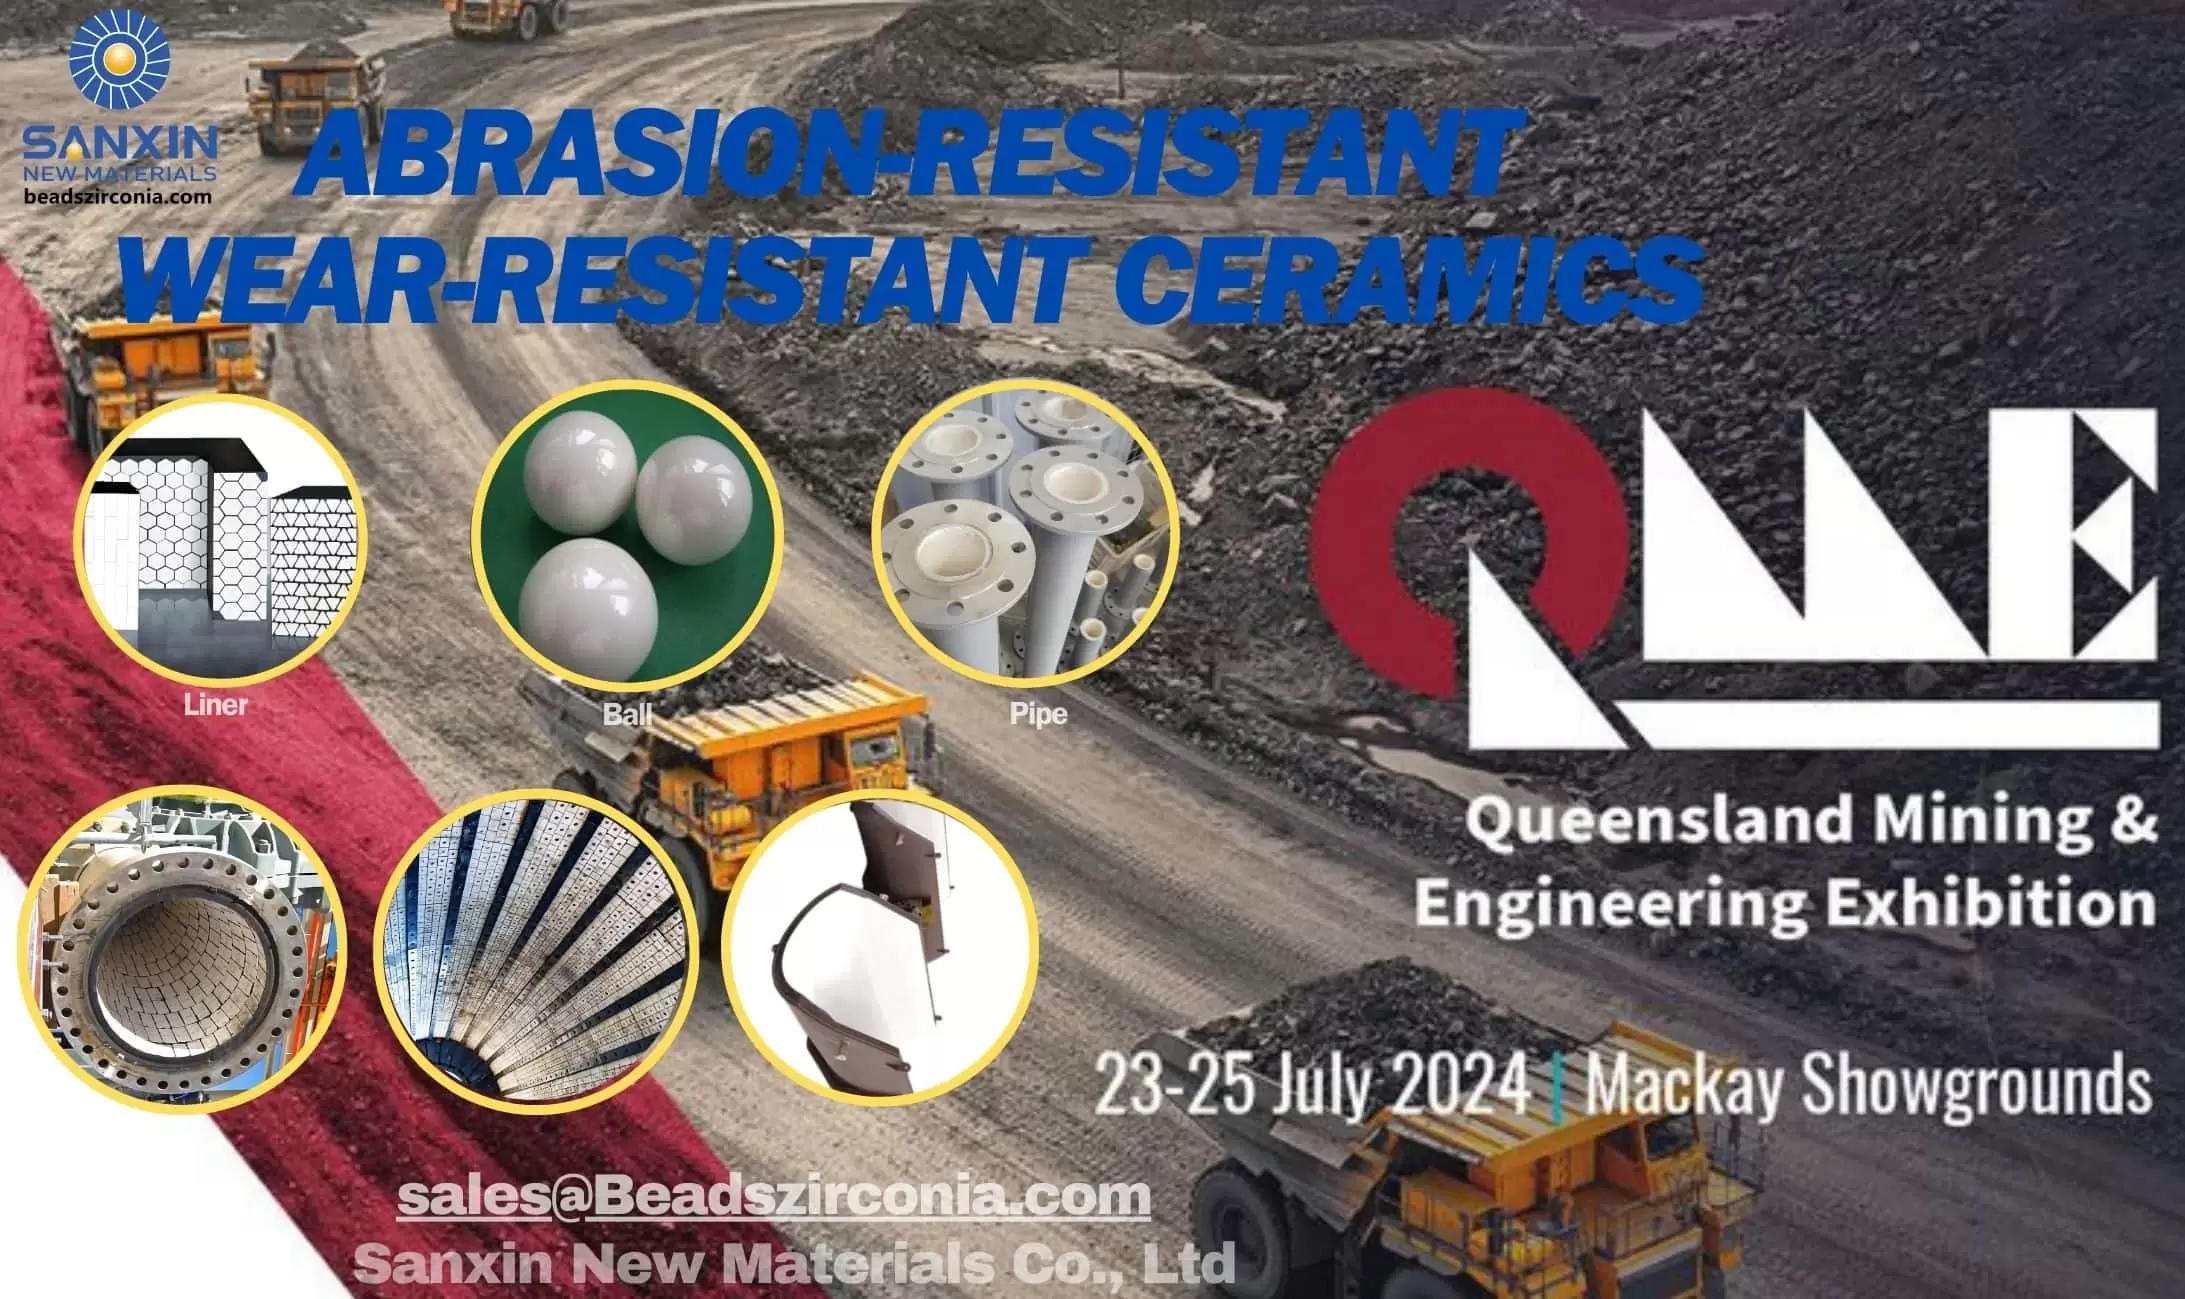 Queensland Mining and Engineering Expo 2024: Meet Sanxin New Materials Co., Ltd at Stand A142